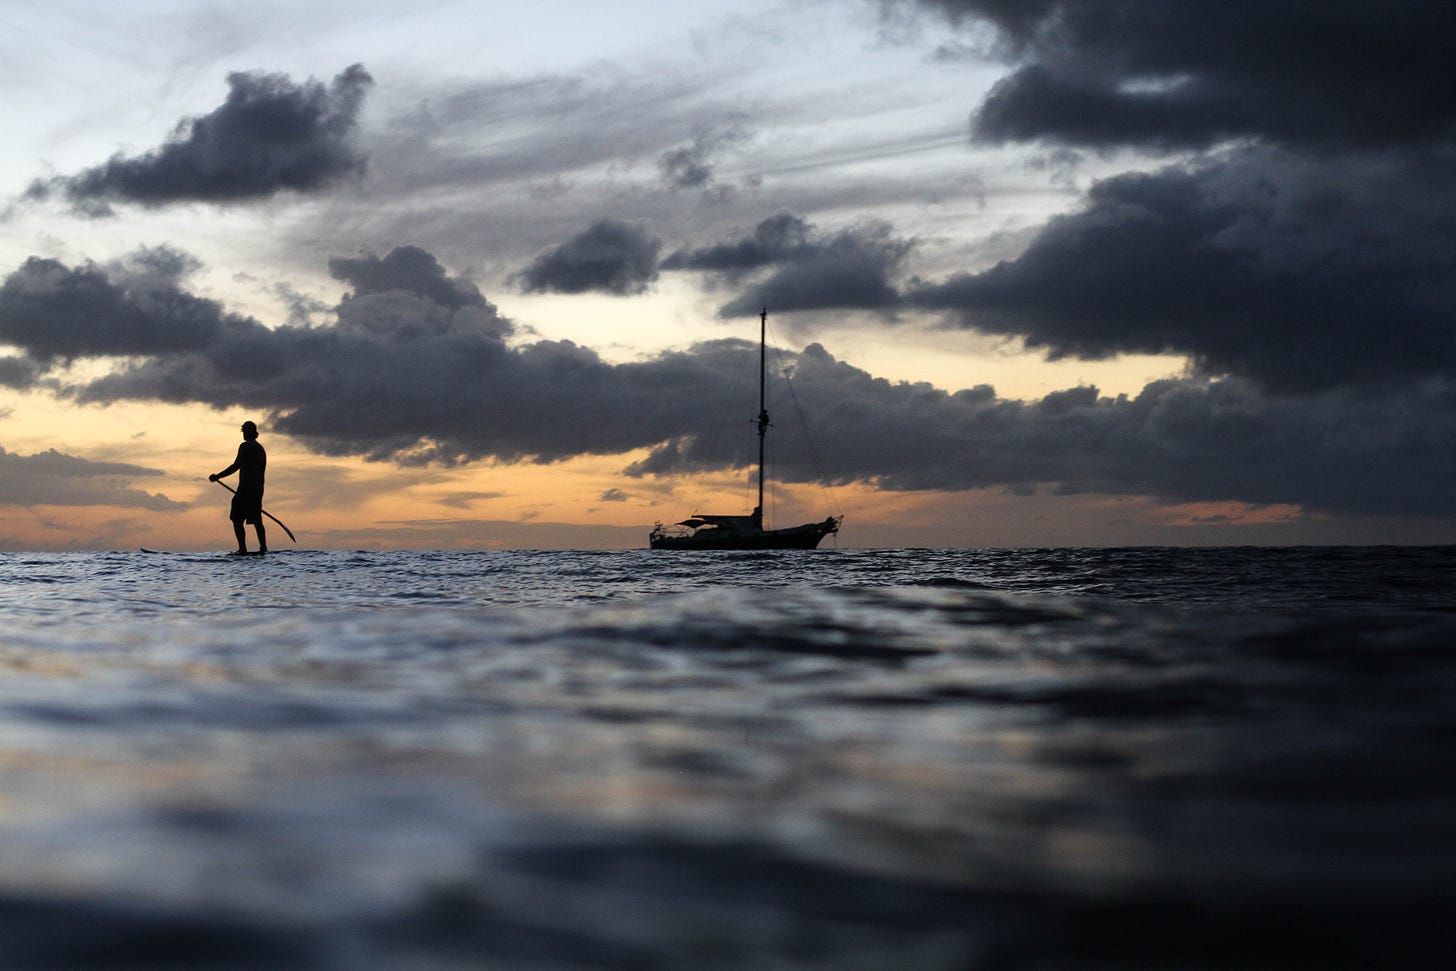 silhouetted individual on a sea board floating on dark waters in the sunset away from a distant sailboat.